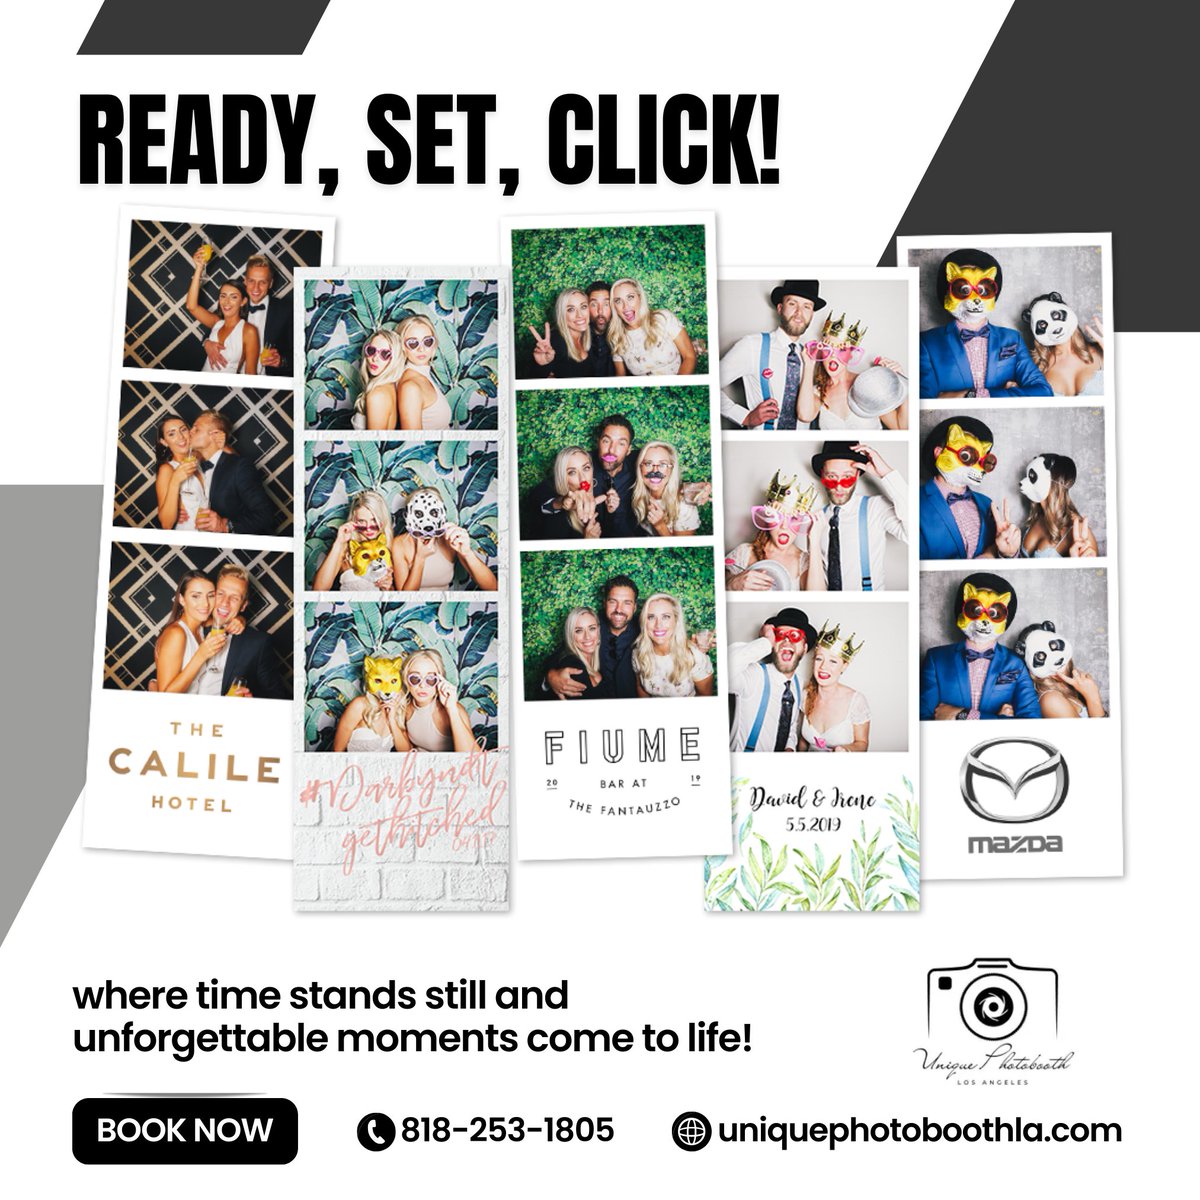 Strike a pose and let your true spirit shine through! Our photo booth with prints is your gateway to a world of fun and laughter. #360photobooth #photoboothrental #partyrental #eventphotobooth #photoboothforrent #photobooth #Losangeles #SanFernandovalley #audioguestbook